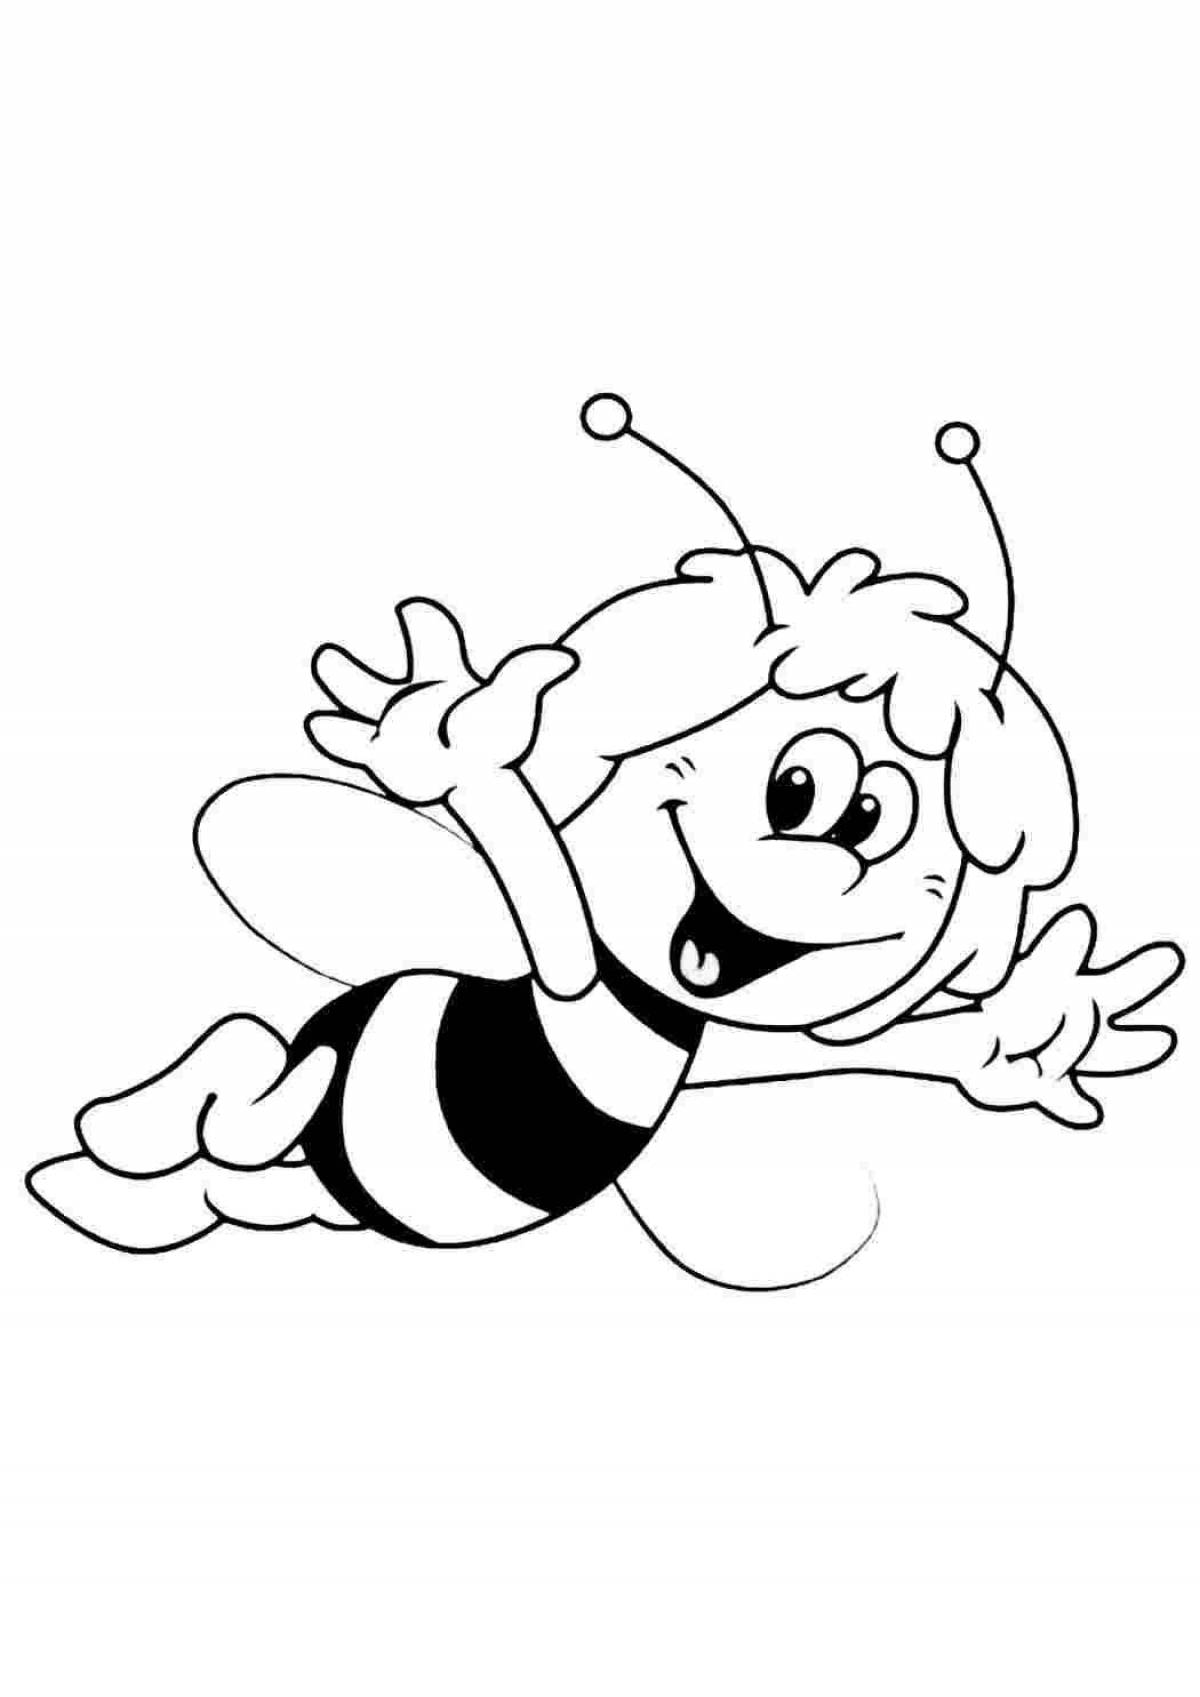 Adorable minecraft bee coloring page